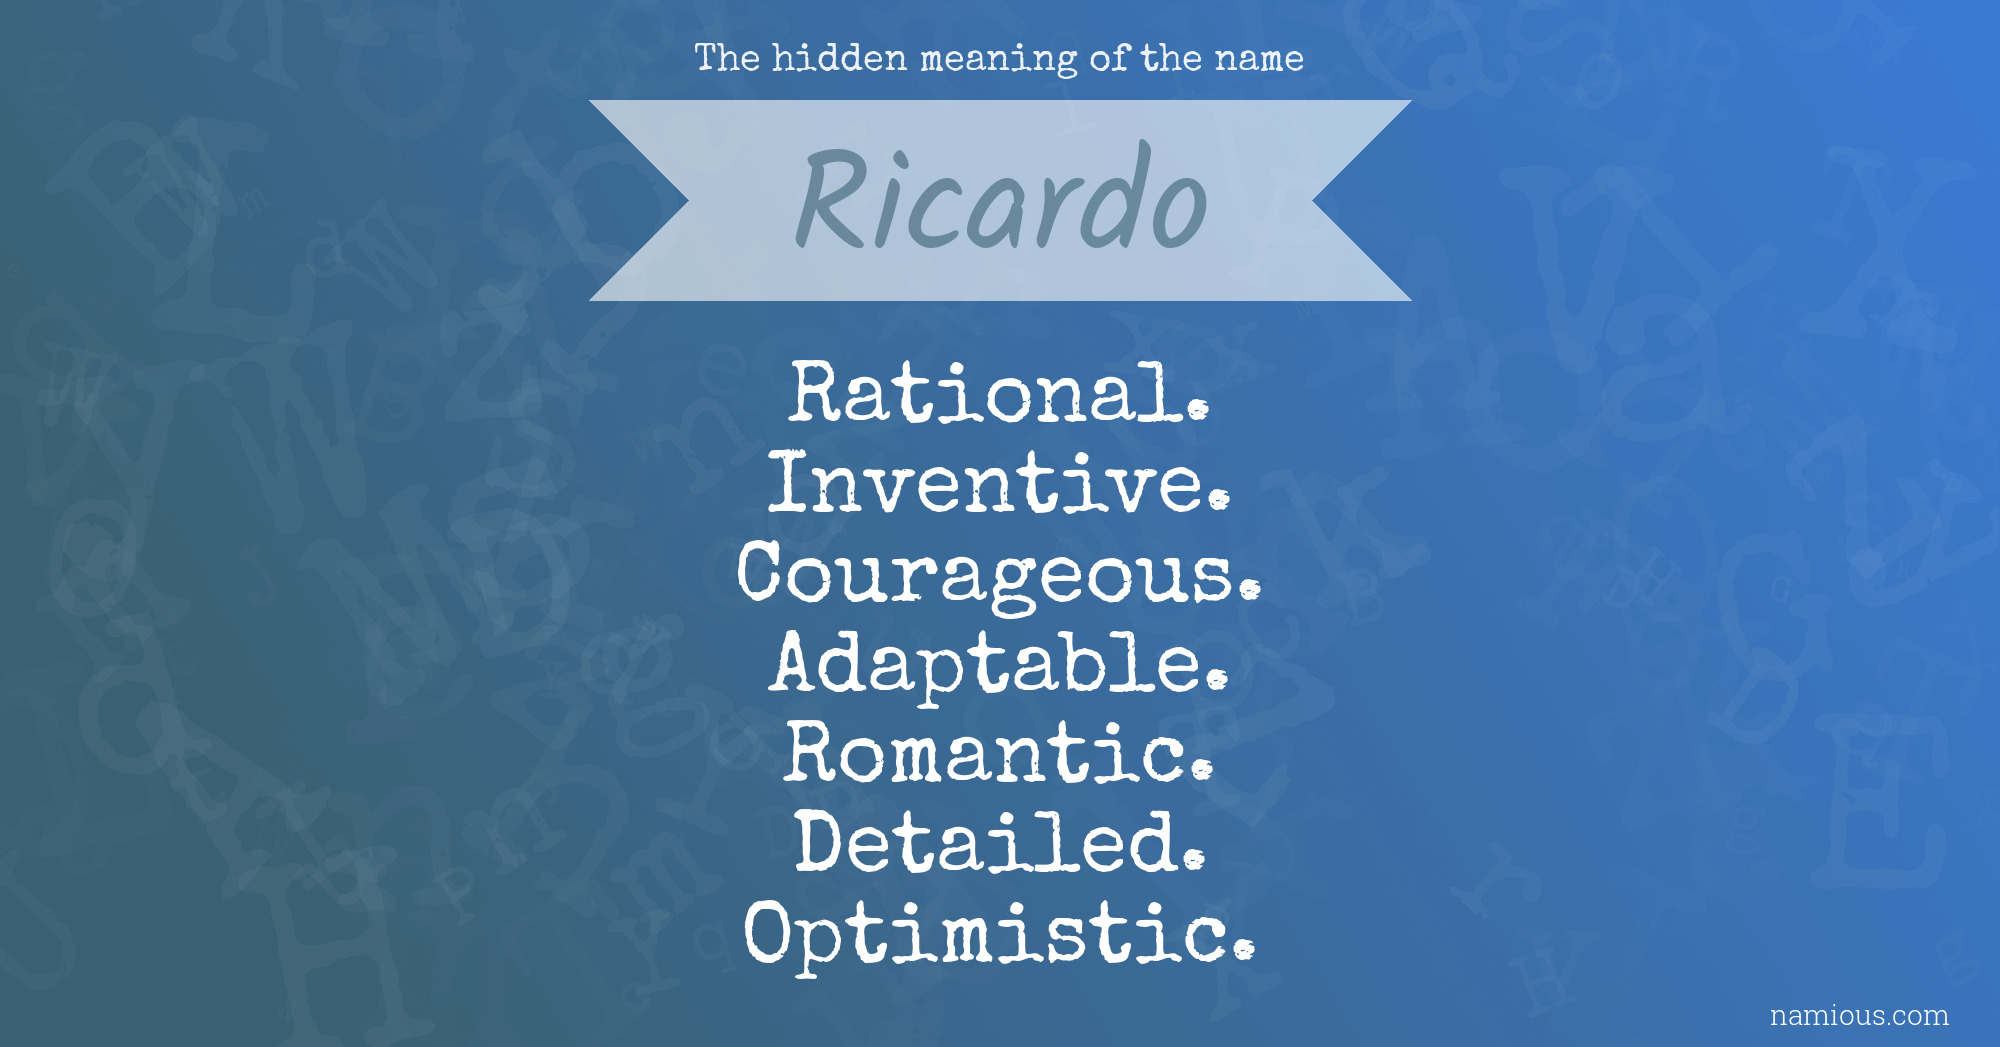 The hidden meaning of the name Ricardo